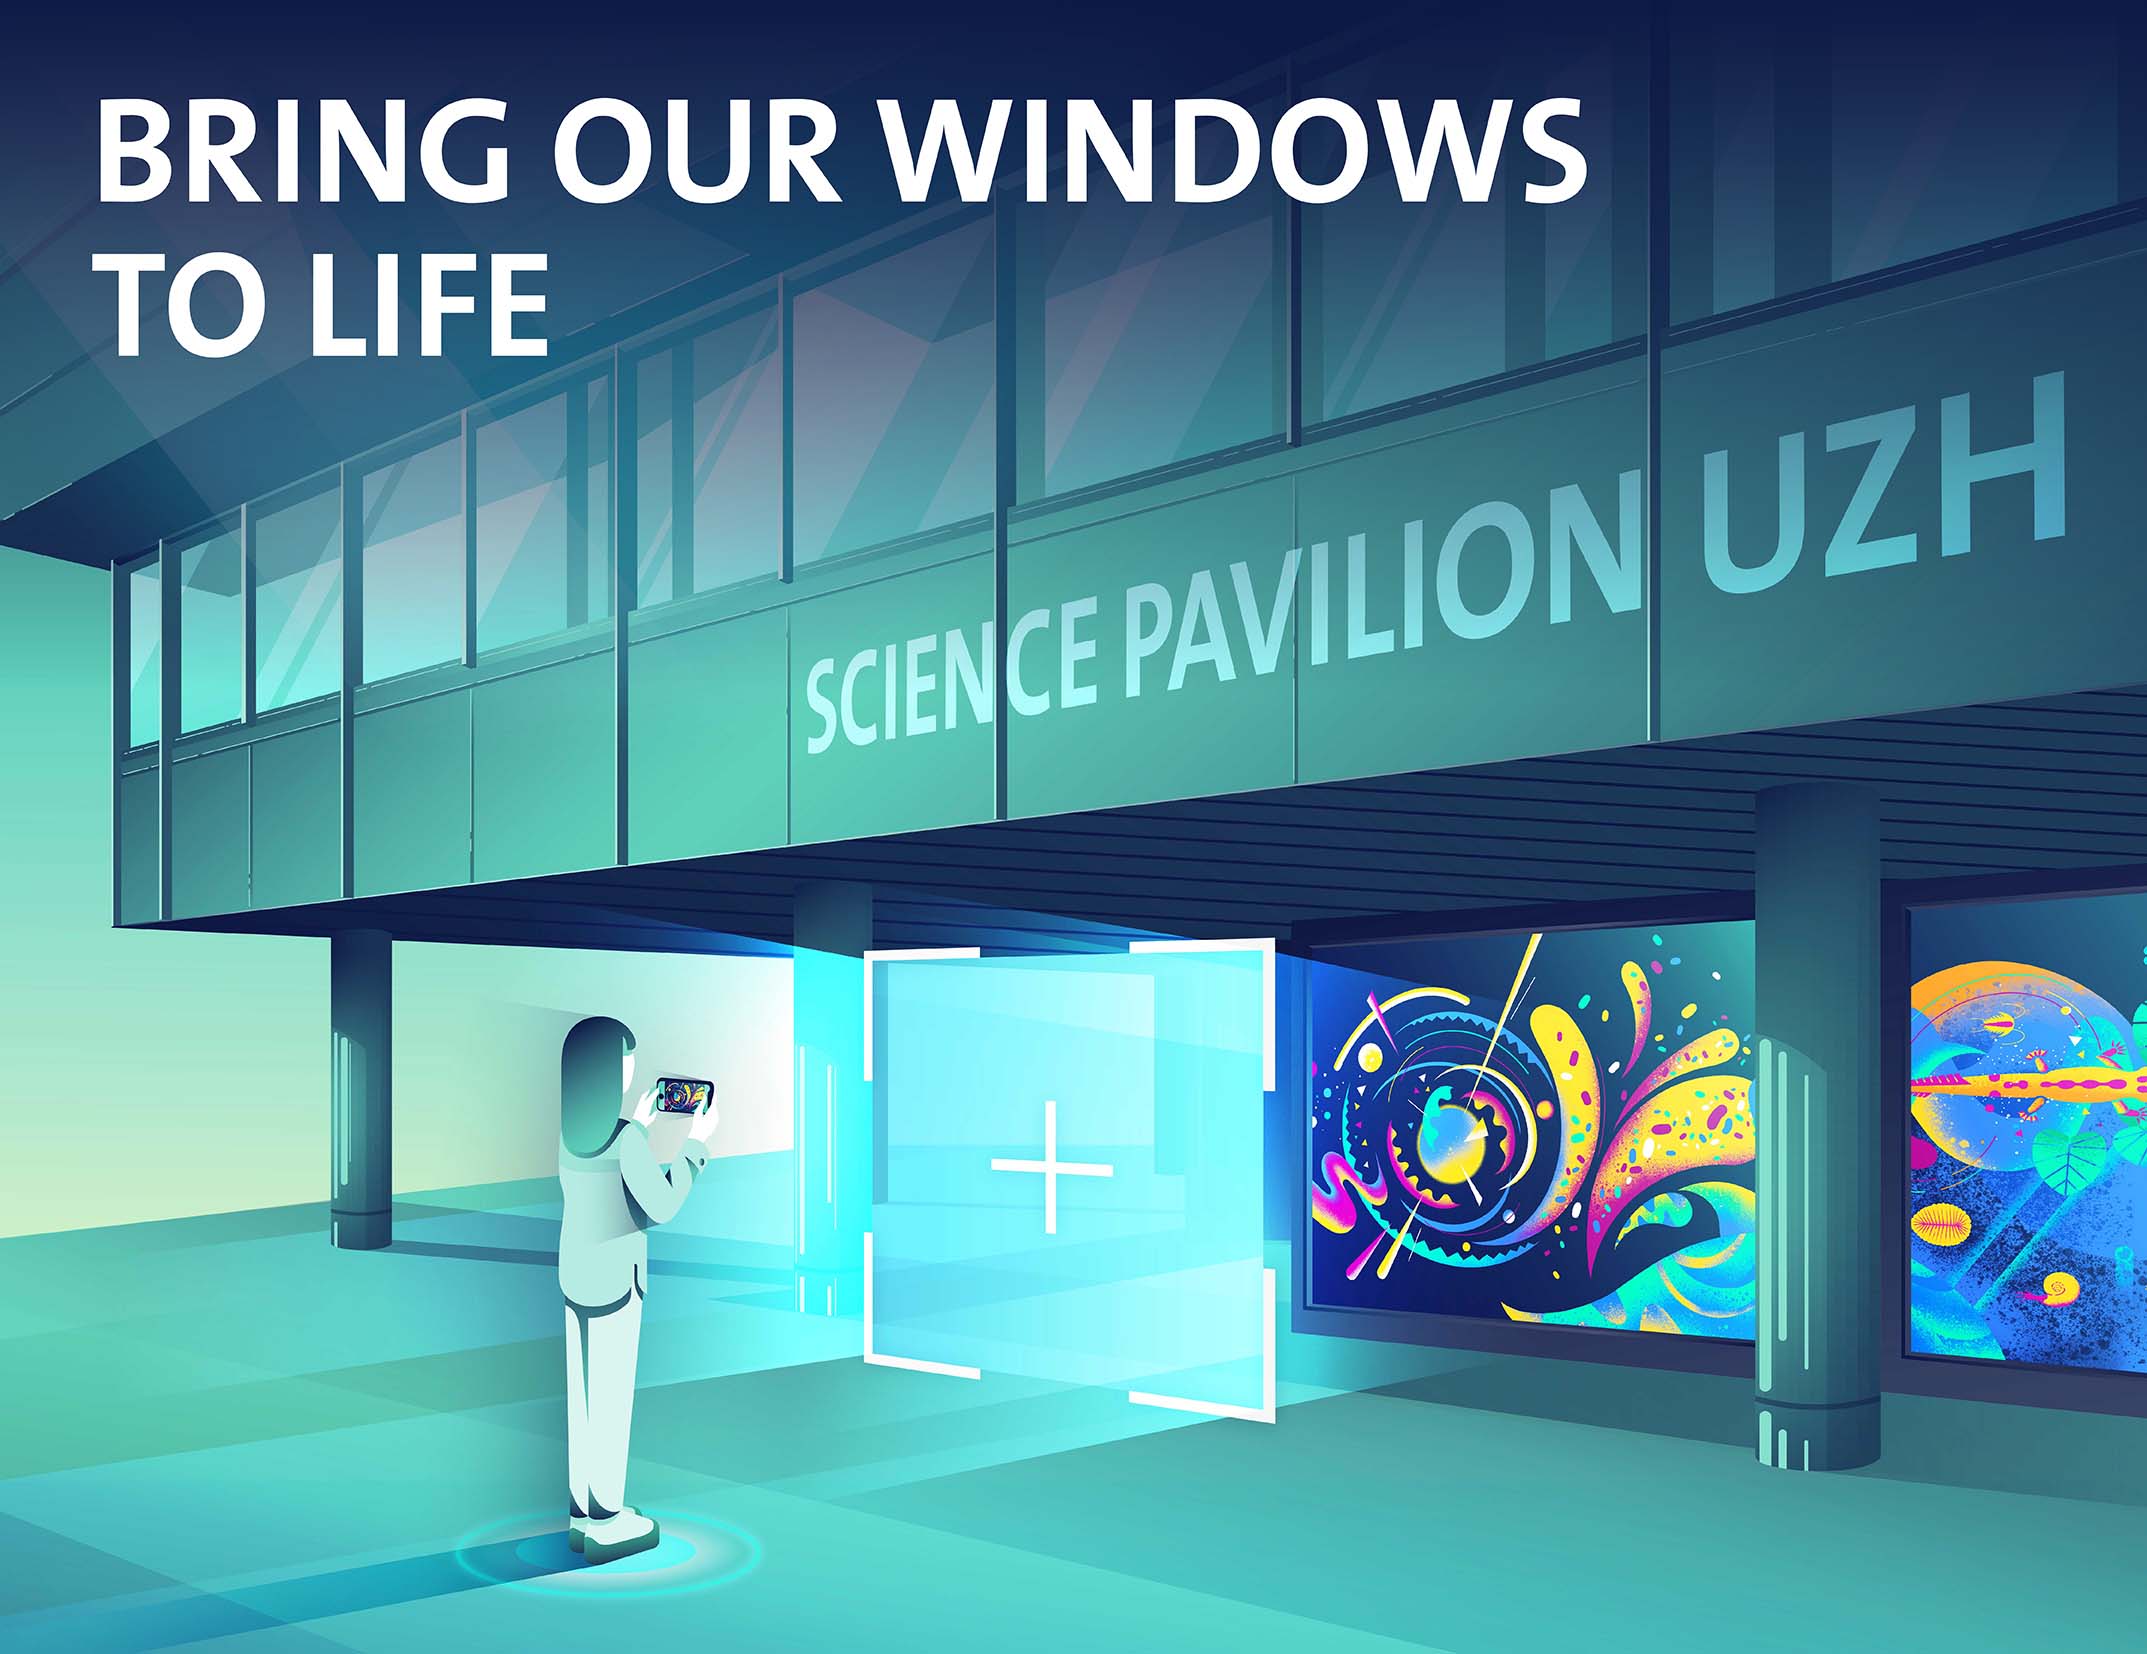 Bring our windows to life